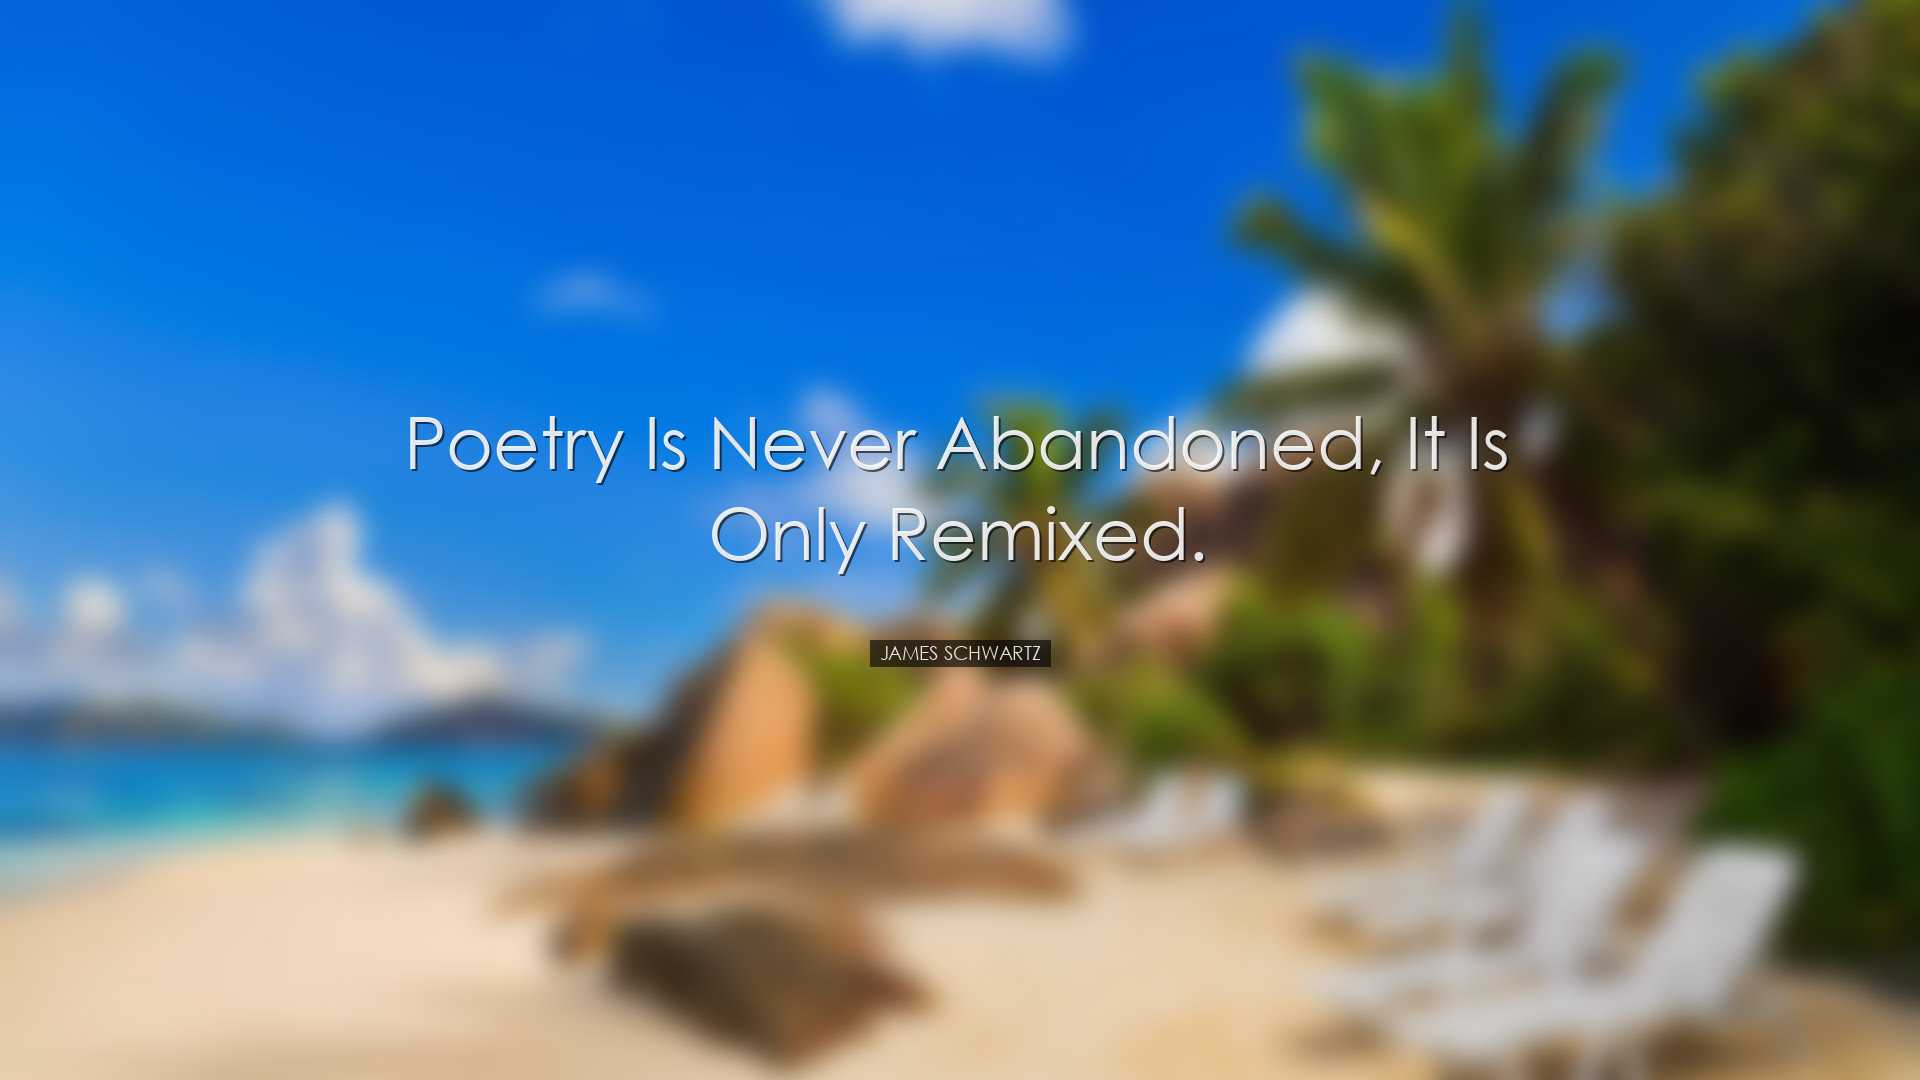 Poetry is never abandoned, it is only remixed. - James Schwartz